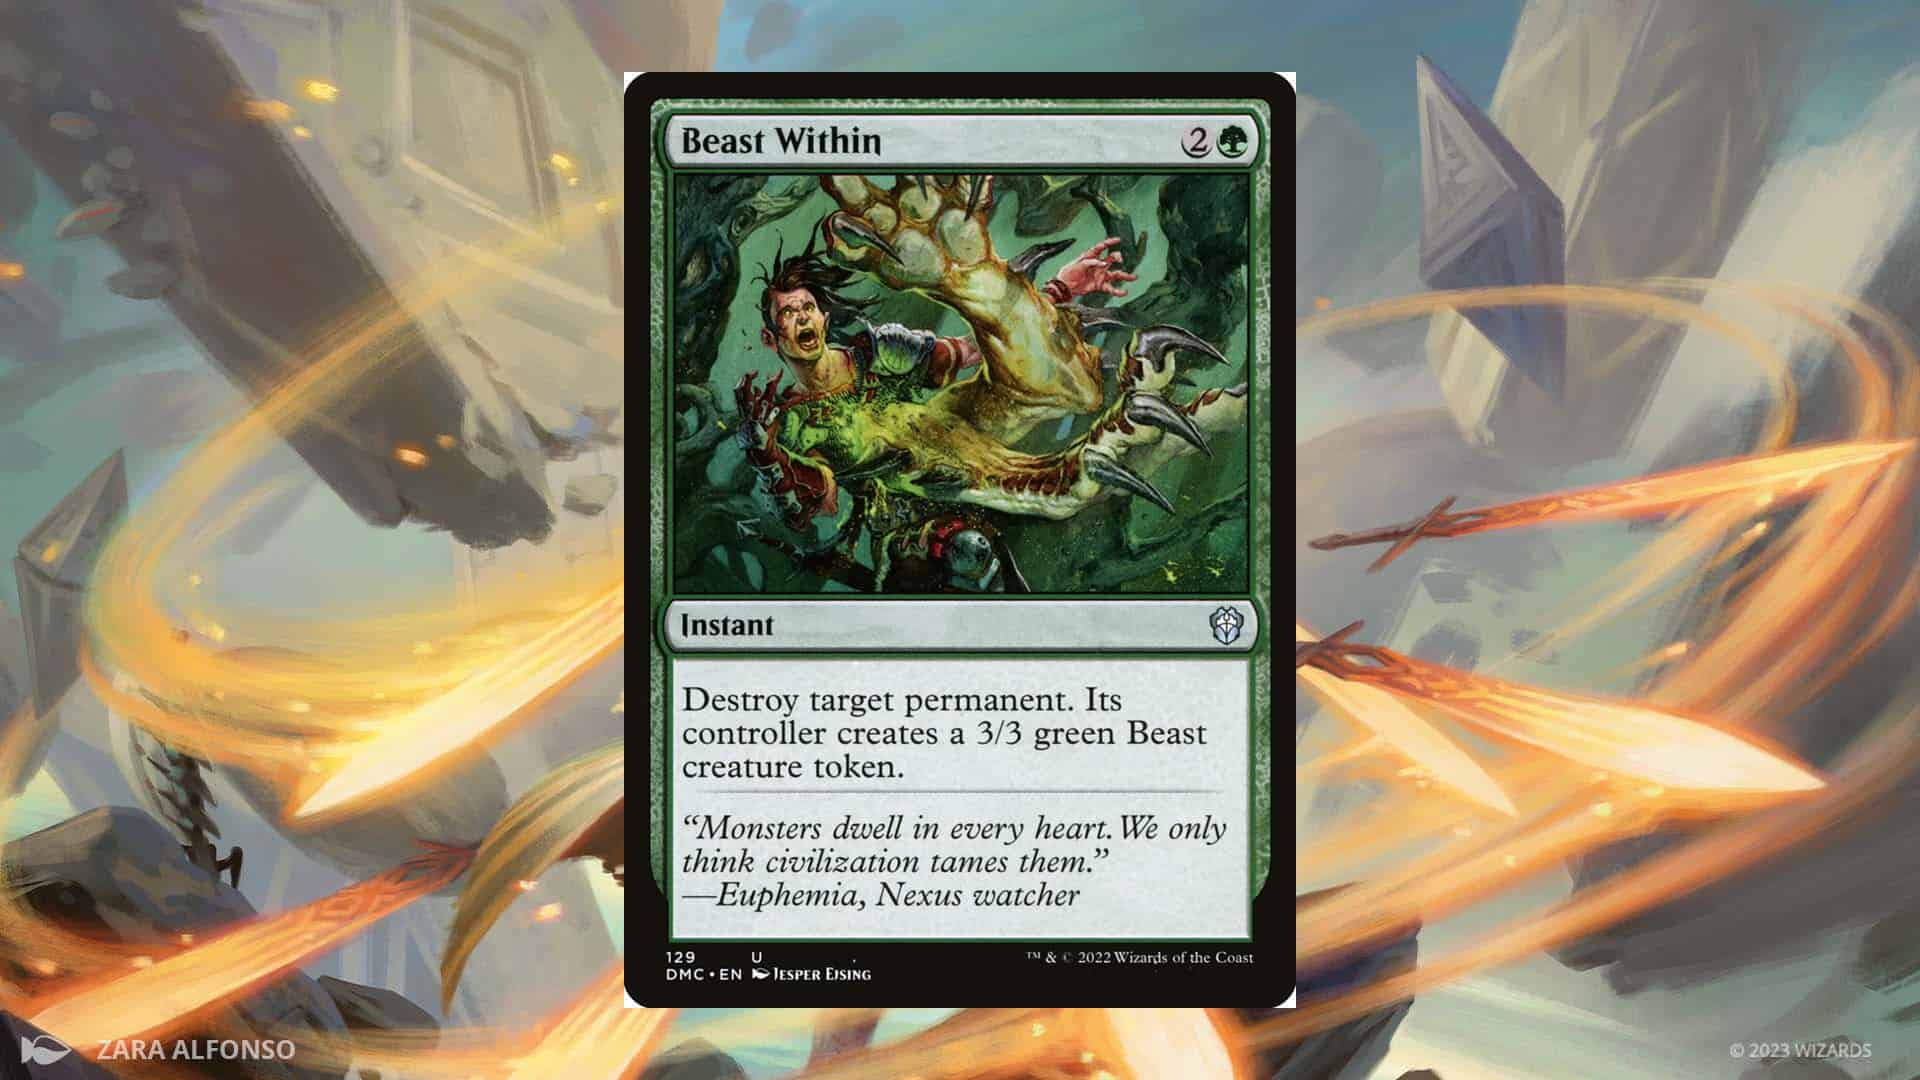 Picture of Beast Within from Magic: the Gathering